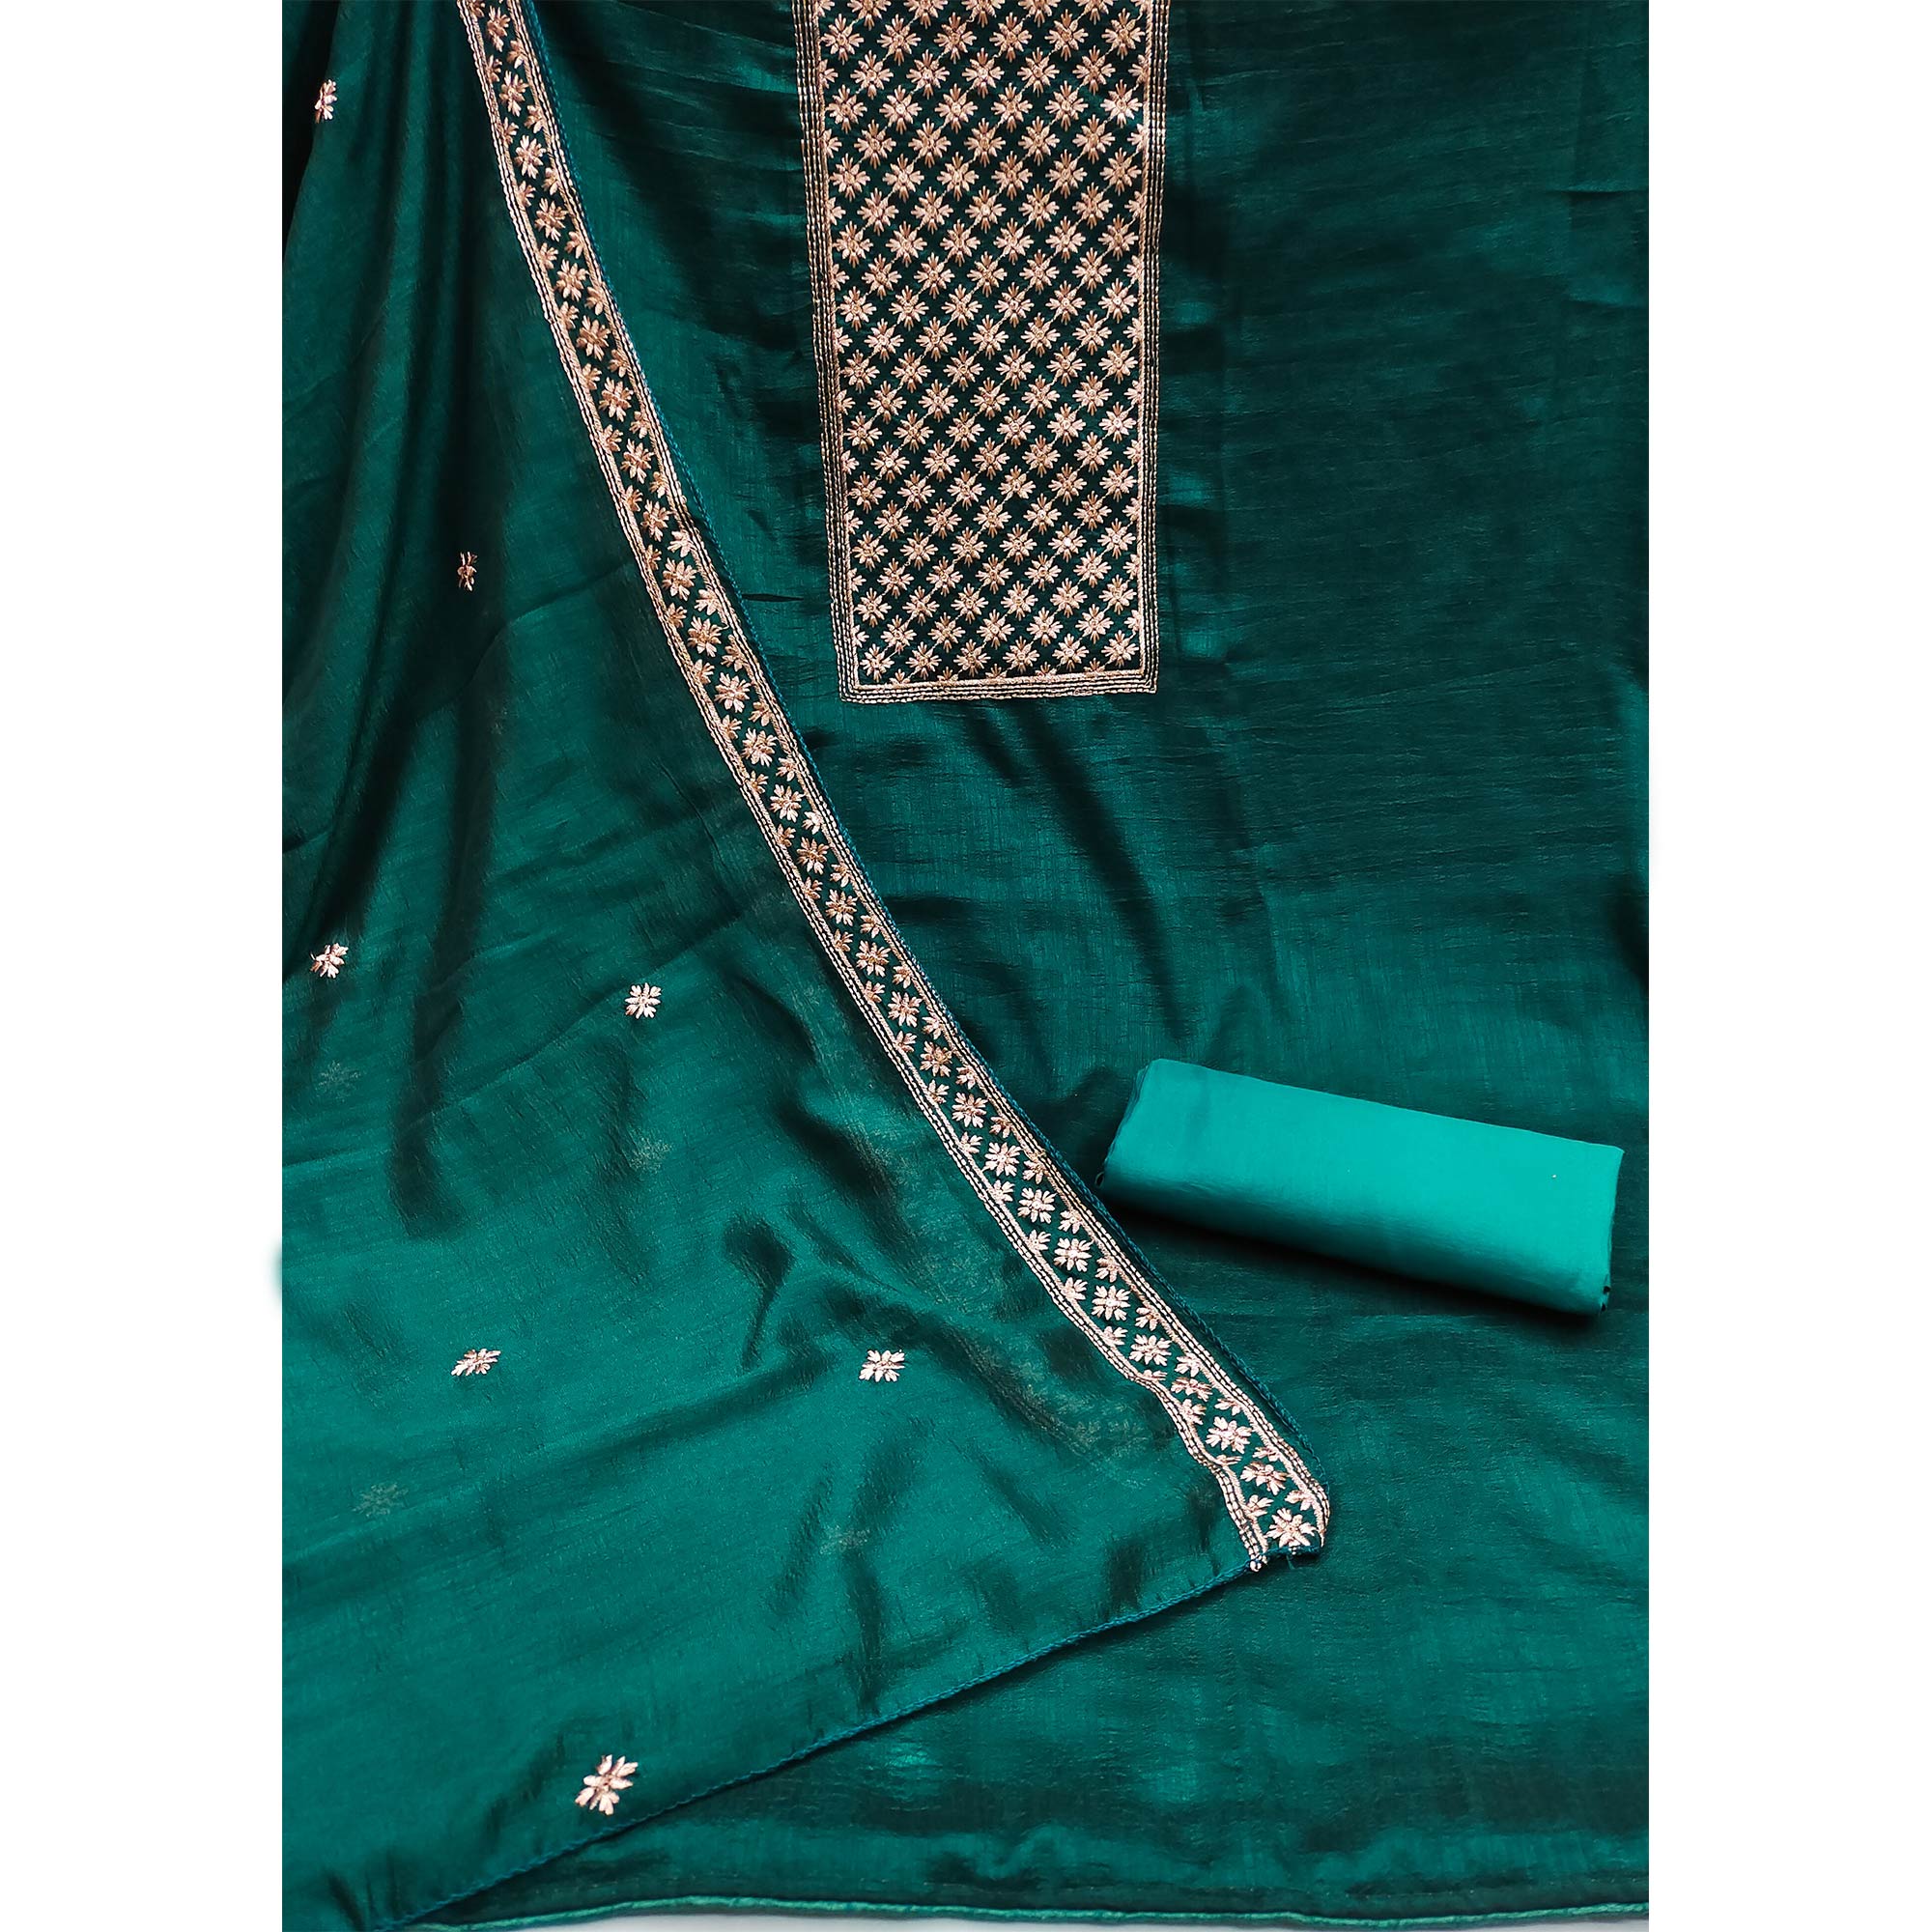 Rama Green Embroidered Modal Dress Material